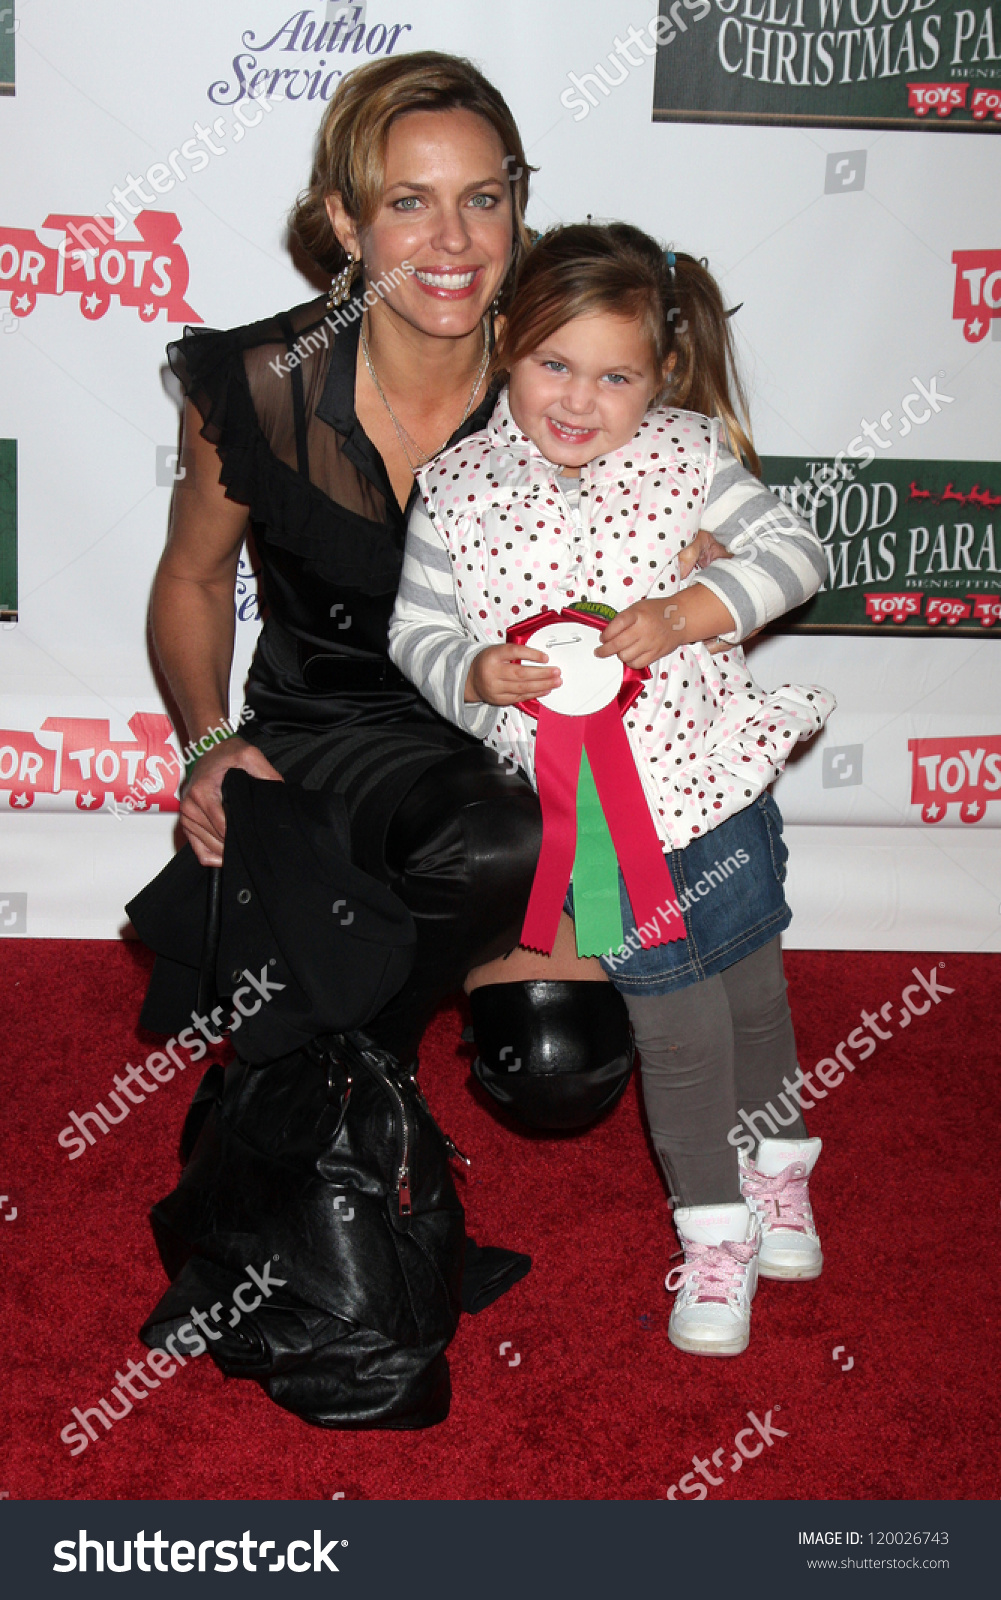 anthony tolentino recommends arianne zucker daughter pictures pic